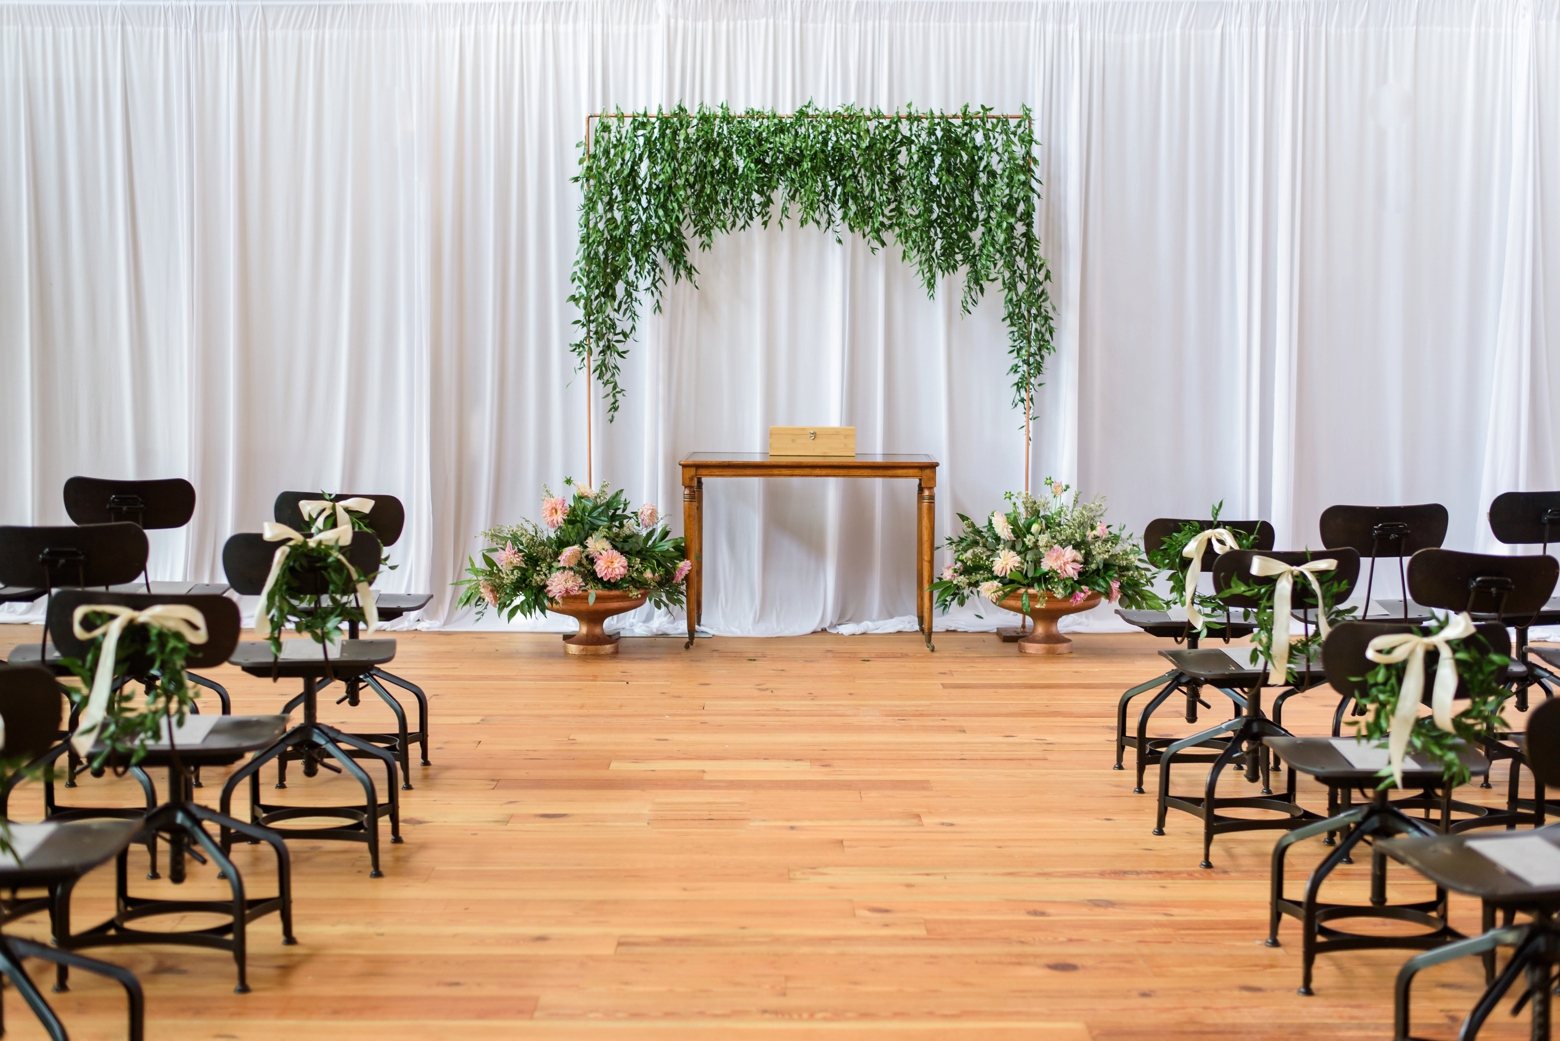 The ceremony space with a greenery arch in Oxford Exchange's library